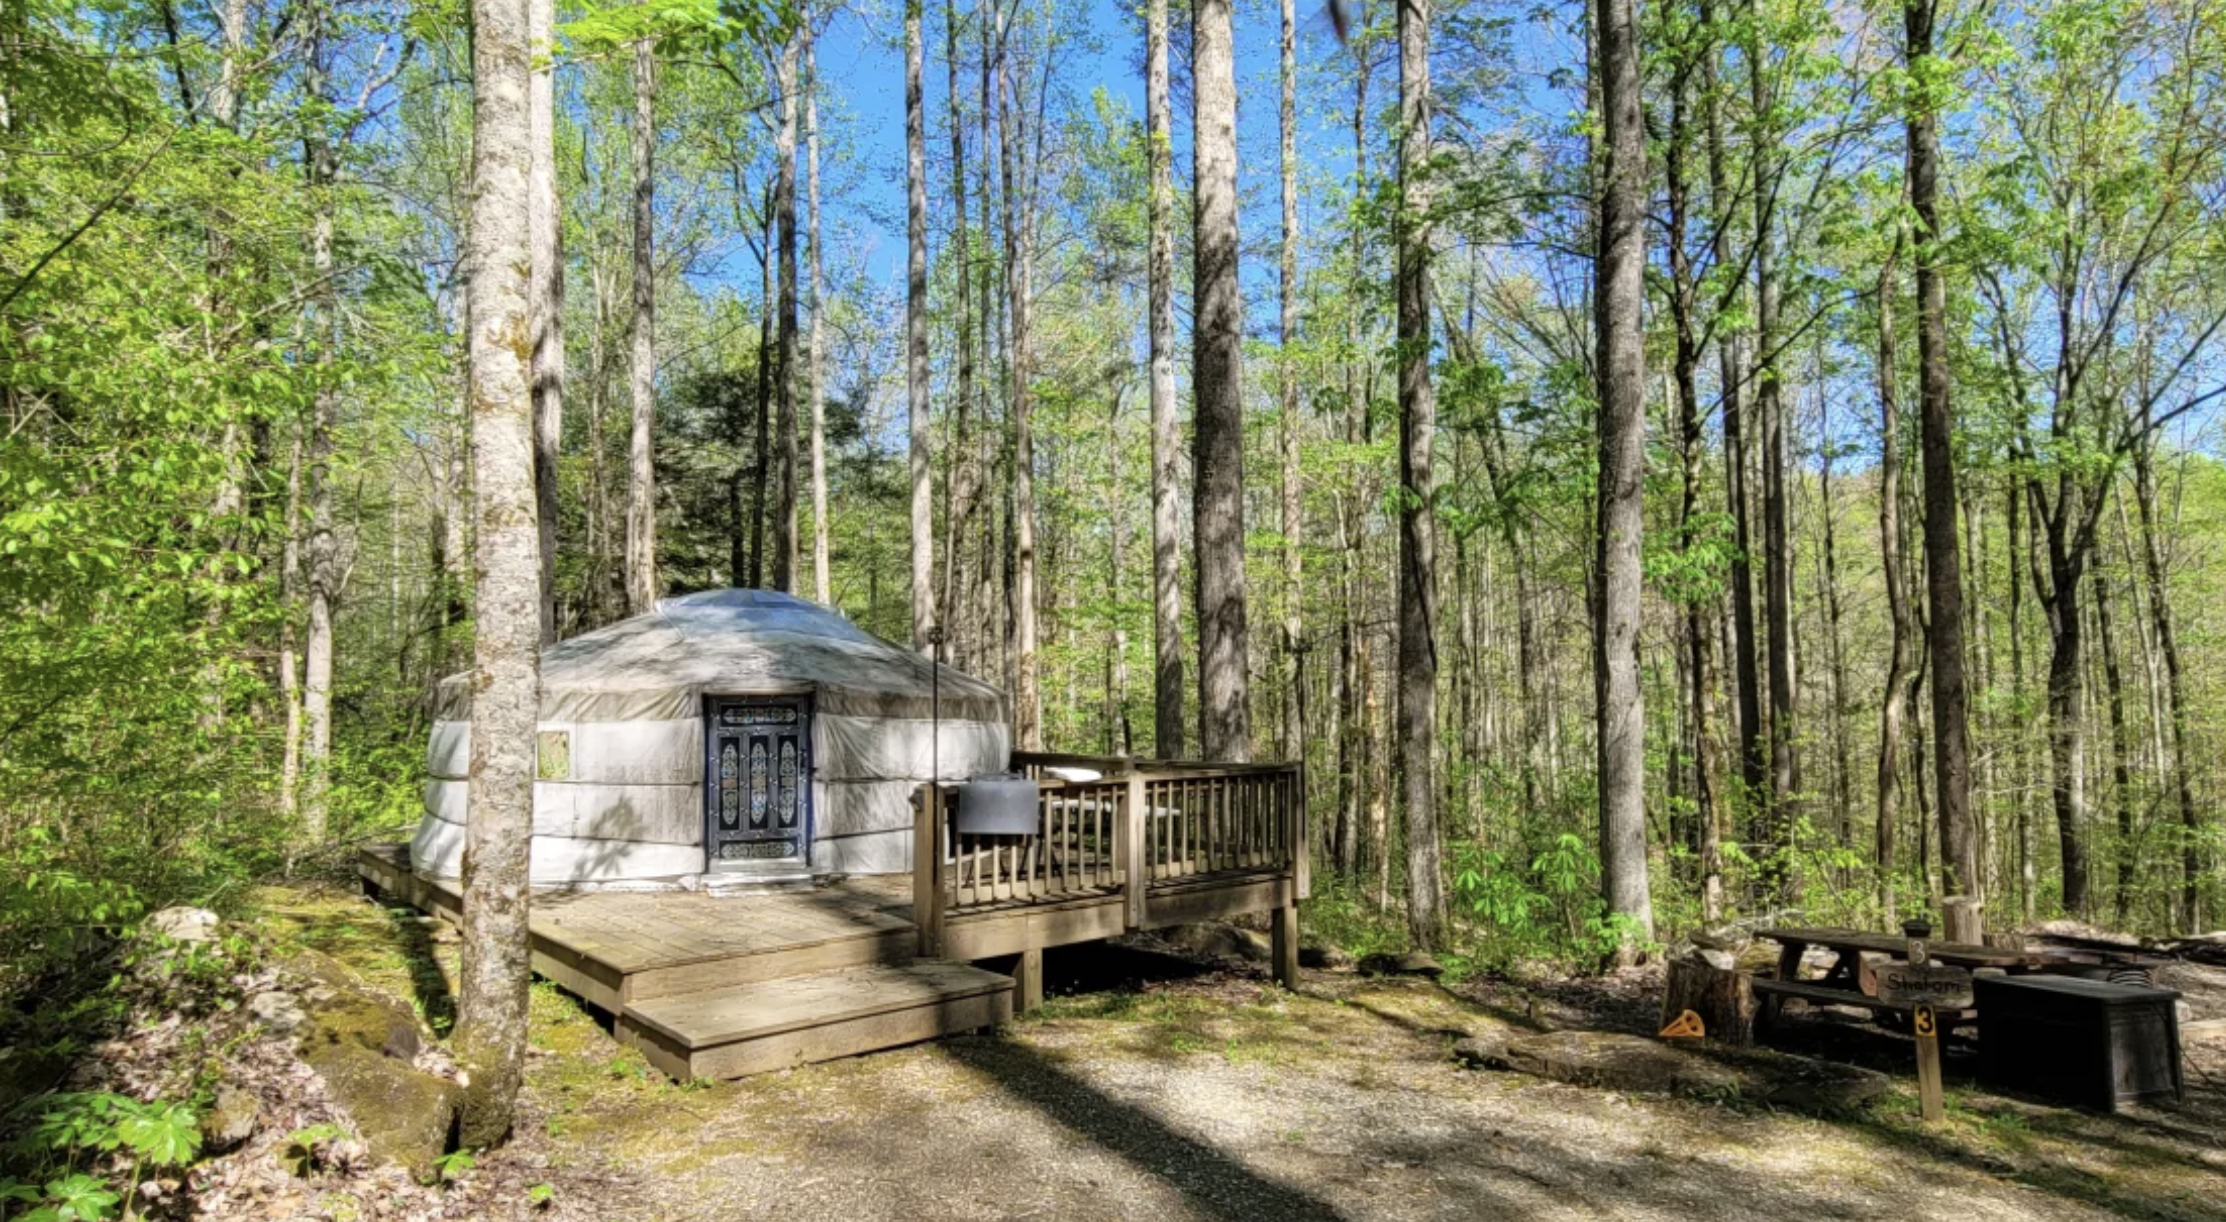 A yurt in the woods surrounded by trees in springtime